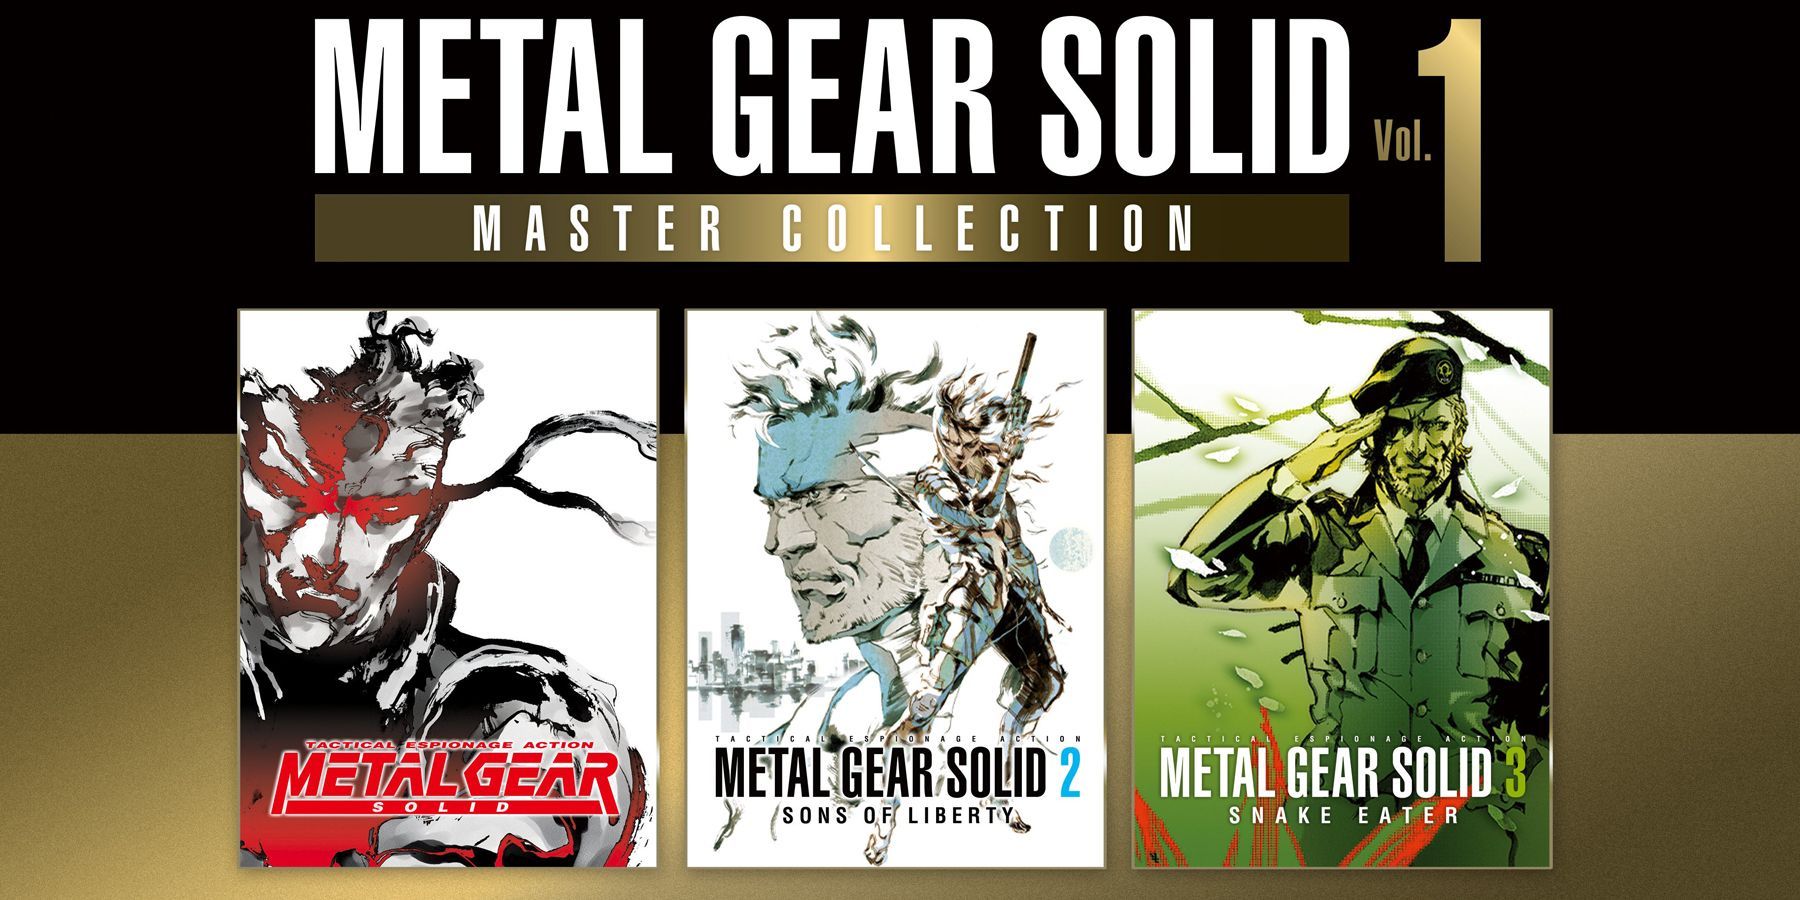 Metal Gear Solid: Master Collection Vol.1 Nintendo Switch - Best Buy